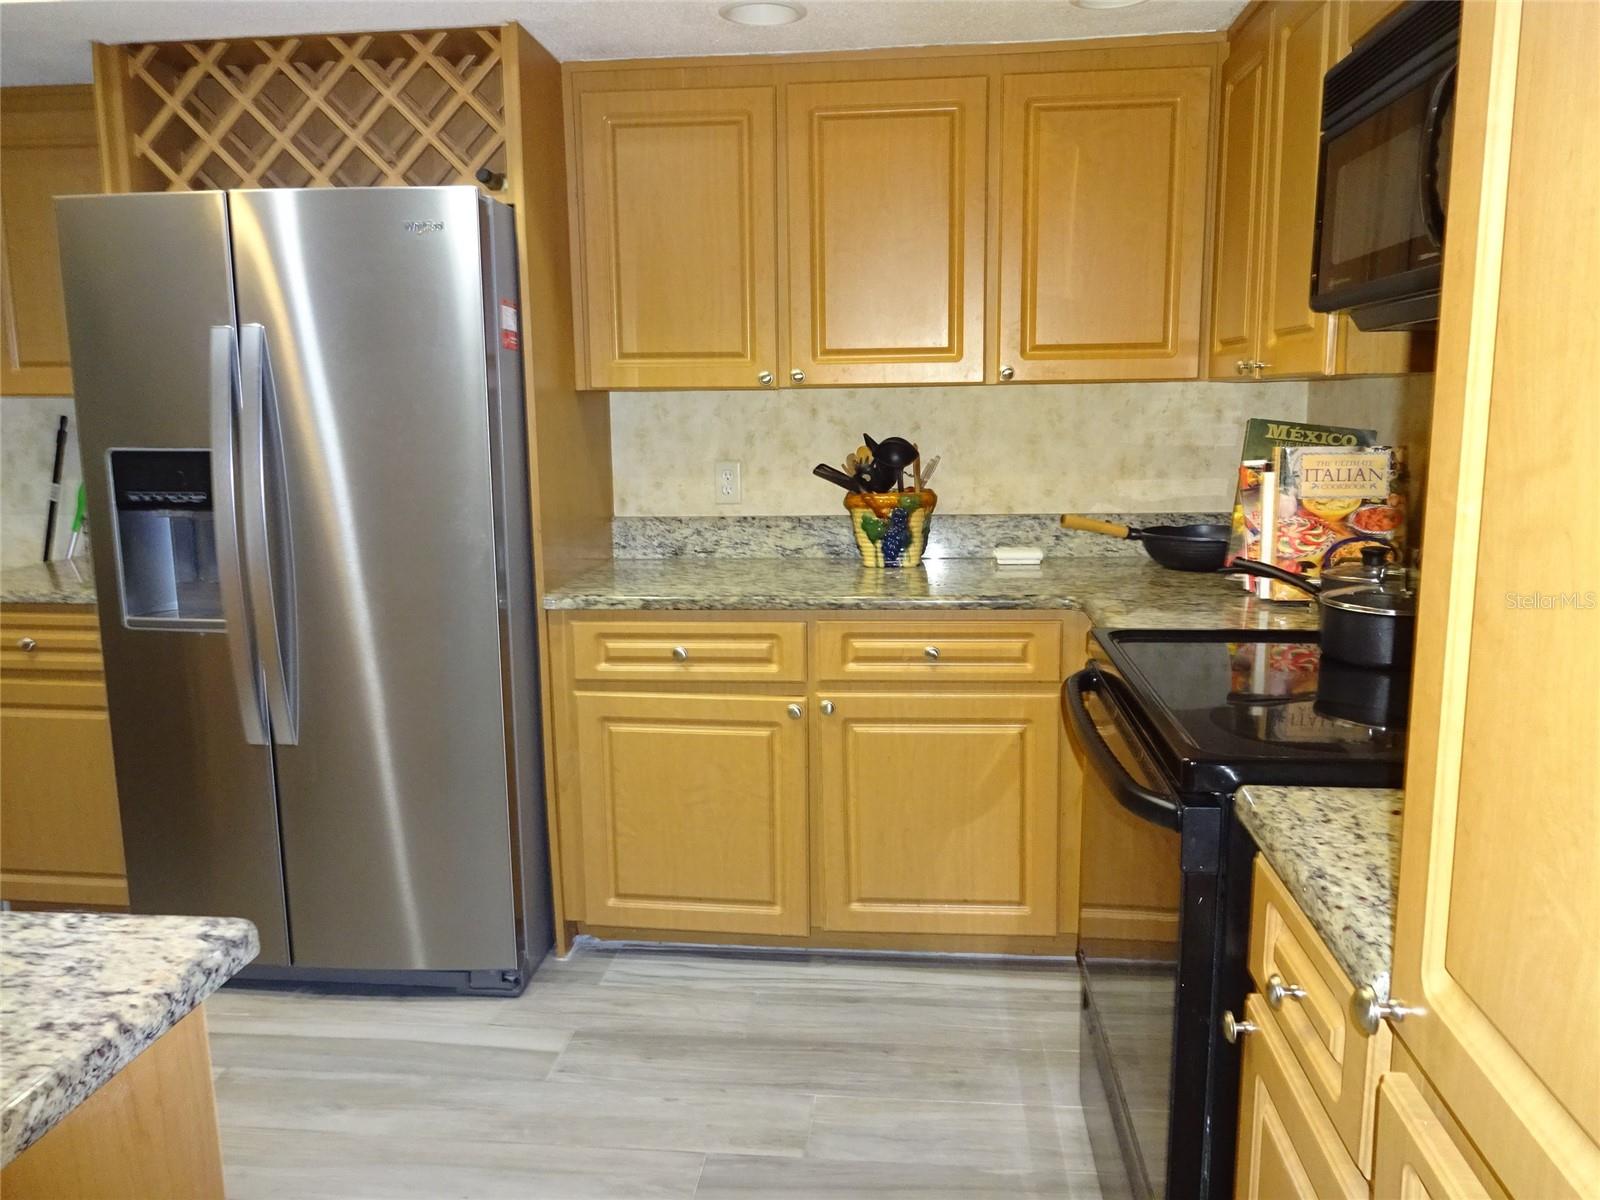 Kitchen....cabinets are brown oak wood...(not yellow)